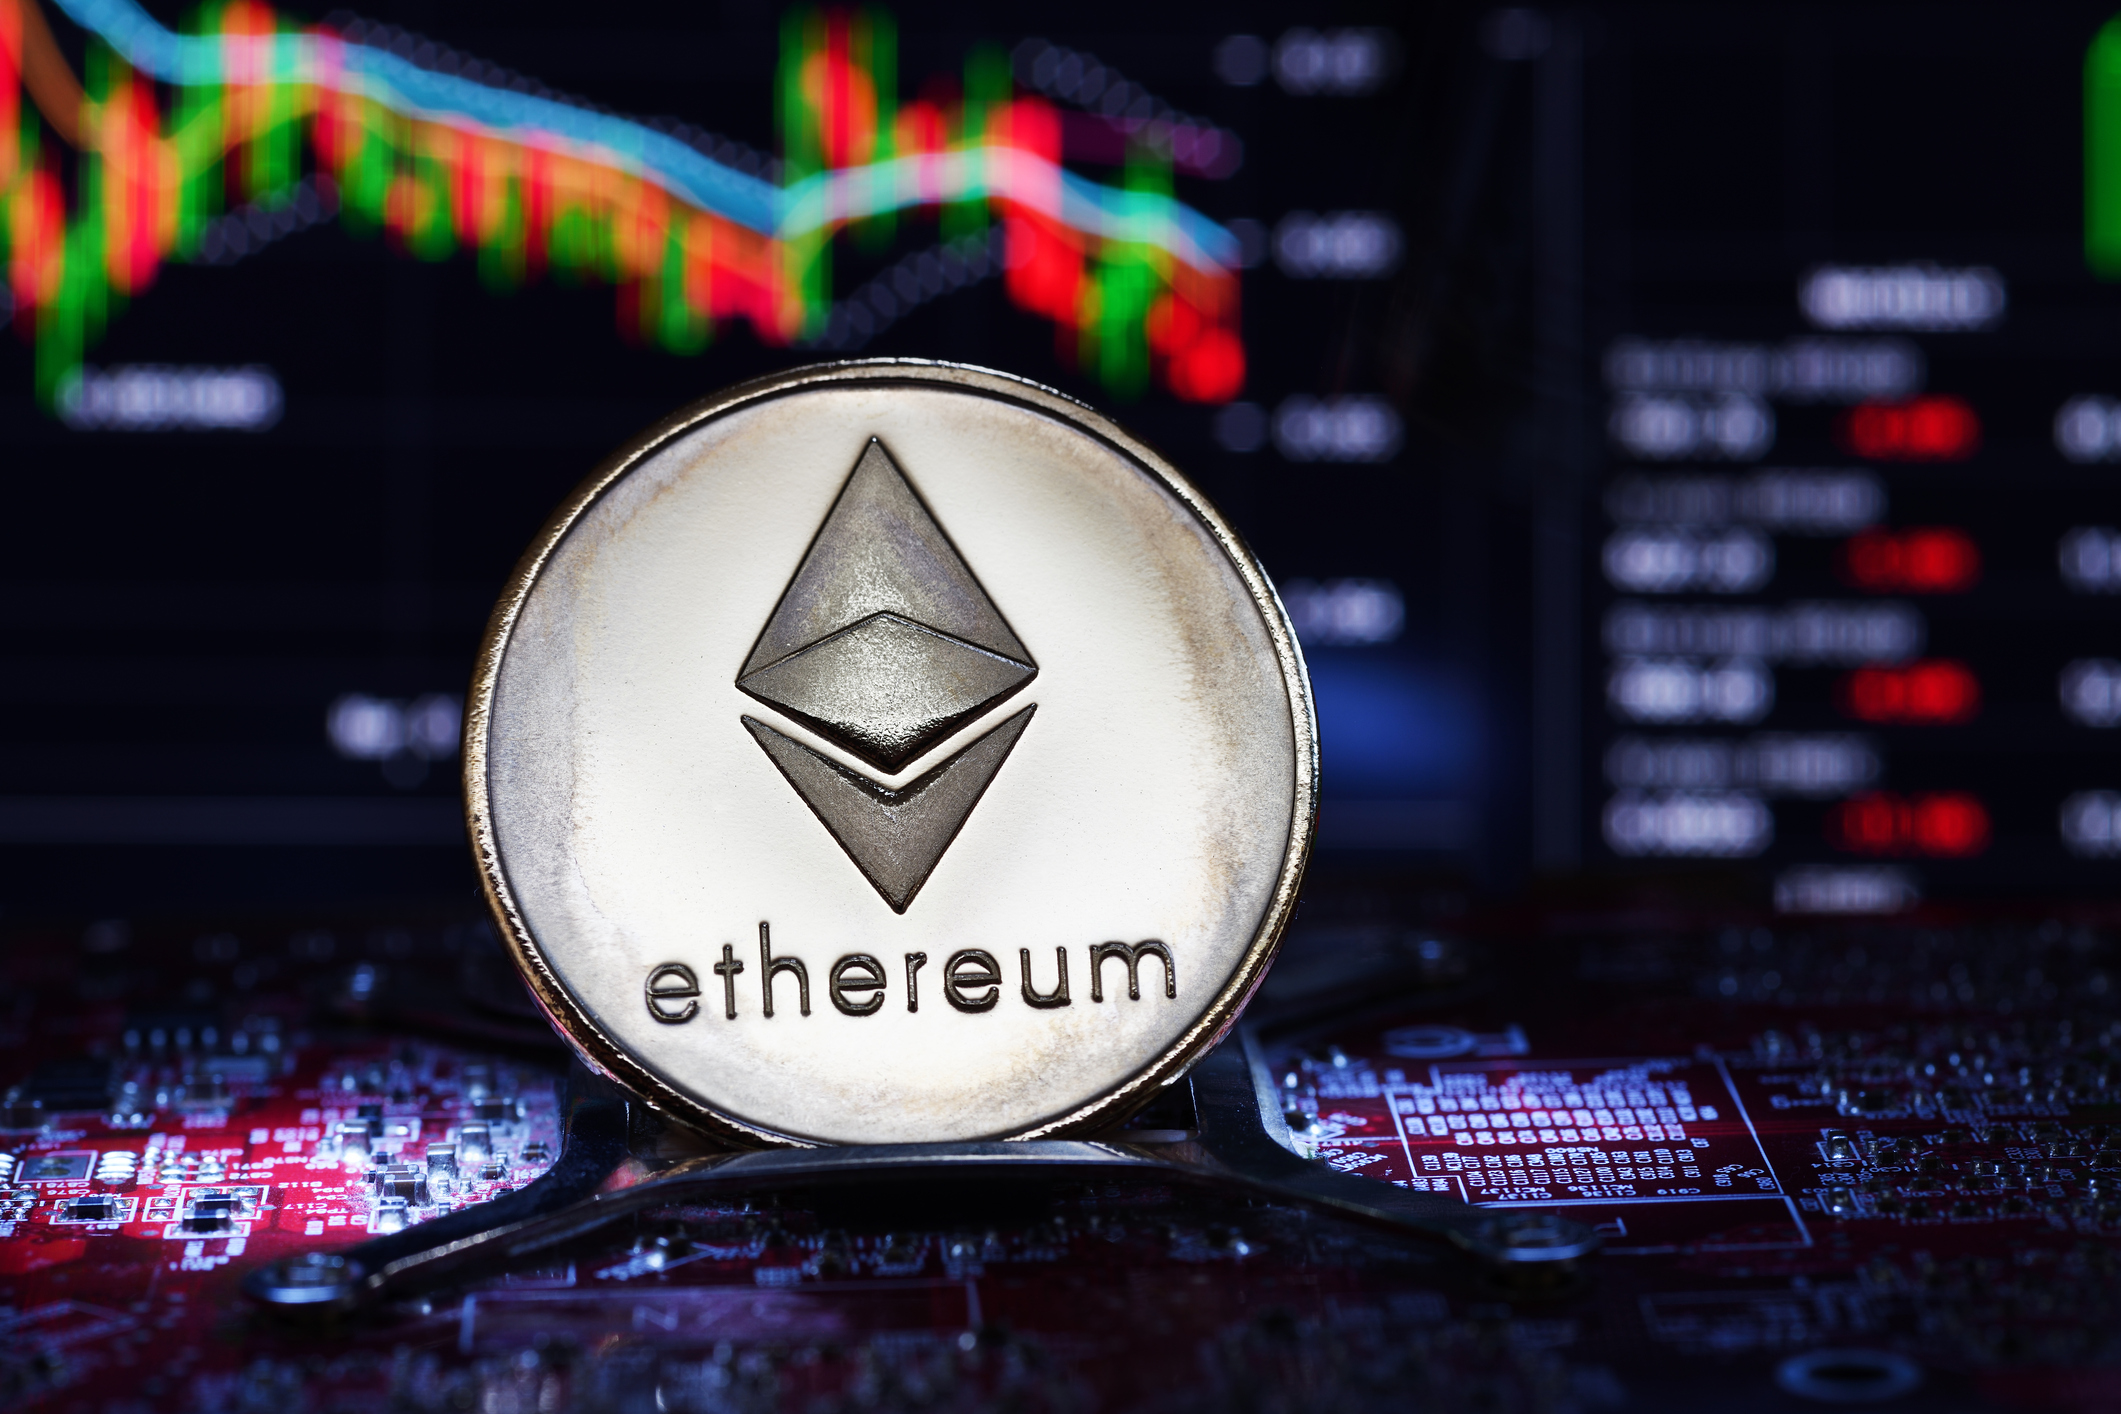 Ethereum Price Prediction for 2023, 2024, 2025, 2030 and Beyond